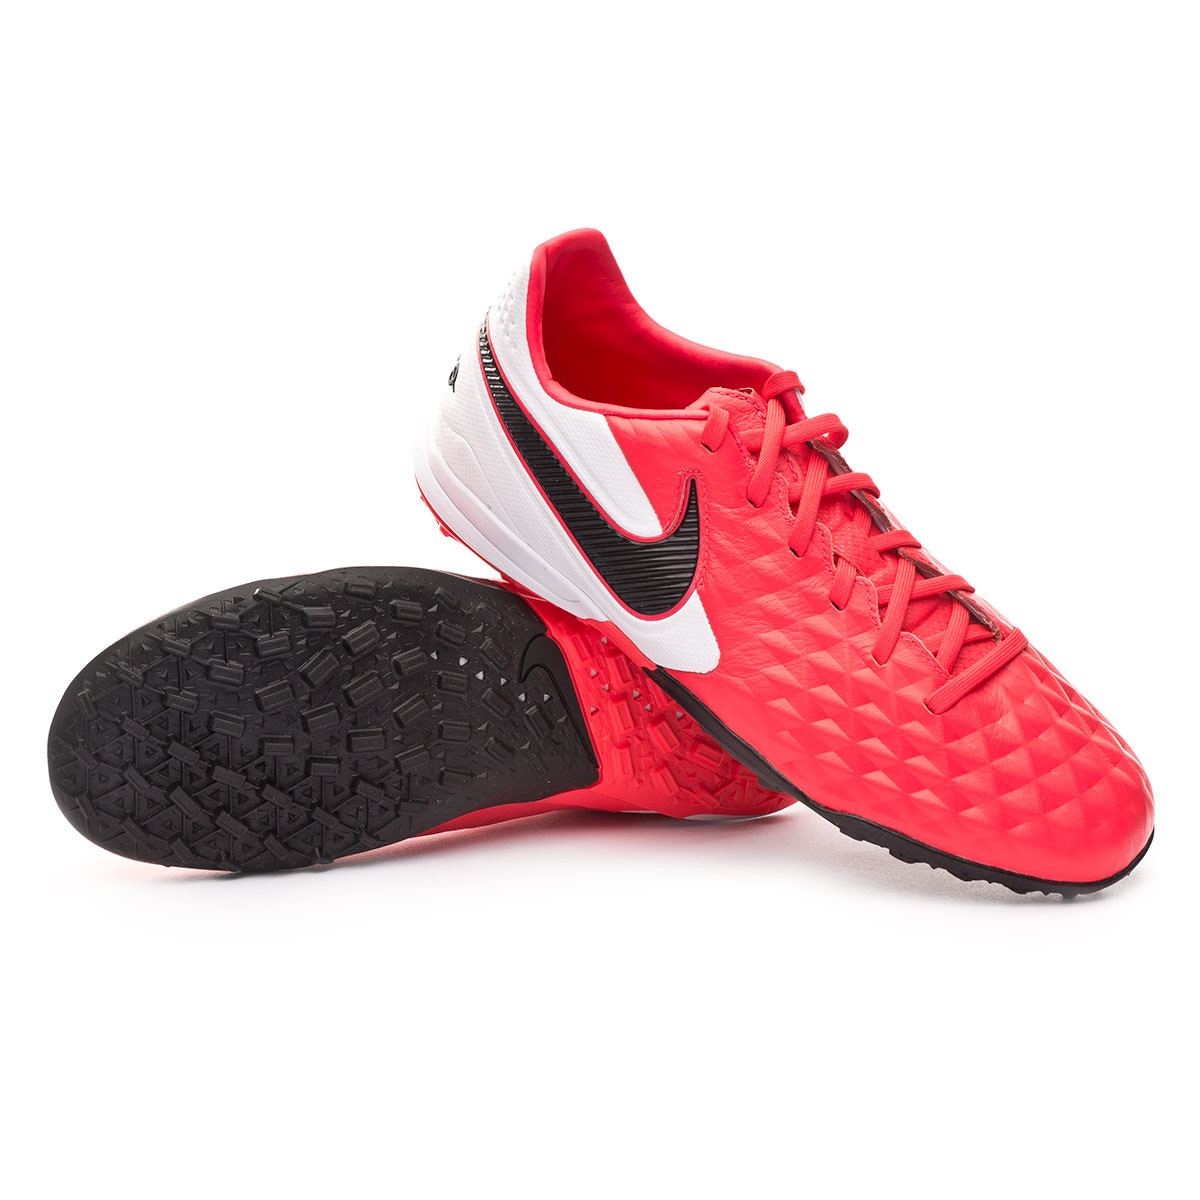 Nike Shoes Weather Legend 8 Elite Fg At5293 007 Price ‹ie